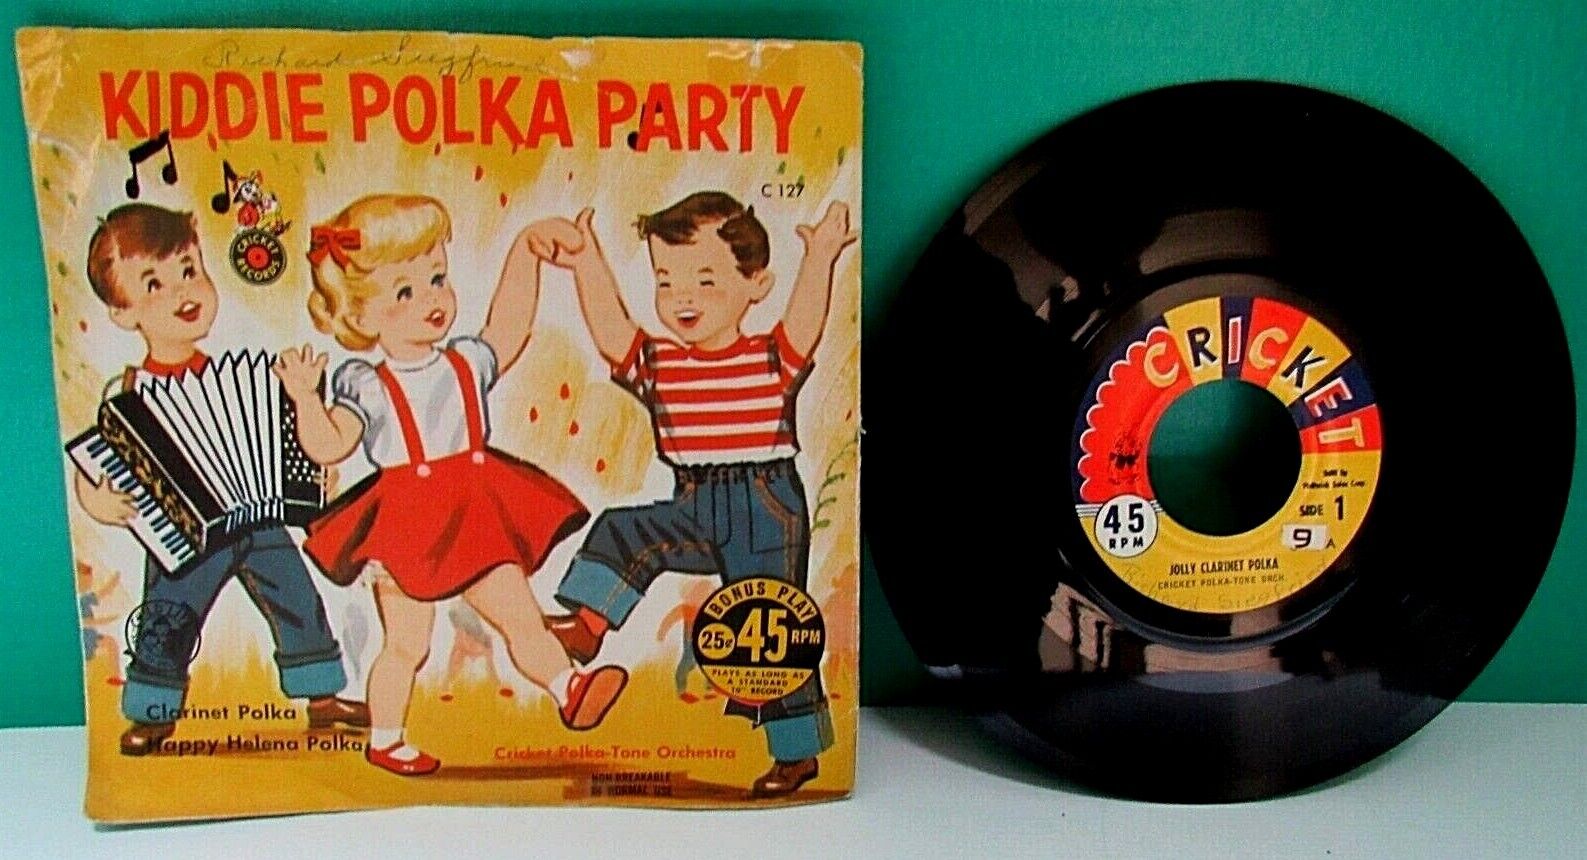 VTG. MID-CENTURY CHILD\'S 45 RPM KIDDIE POLKA PARTY RECORD ~CLASSIC 50\'s ARTWORK